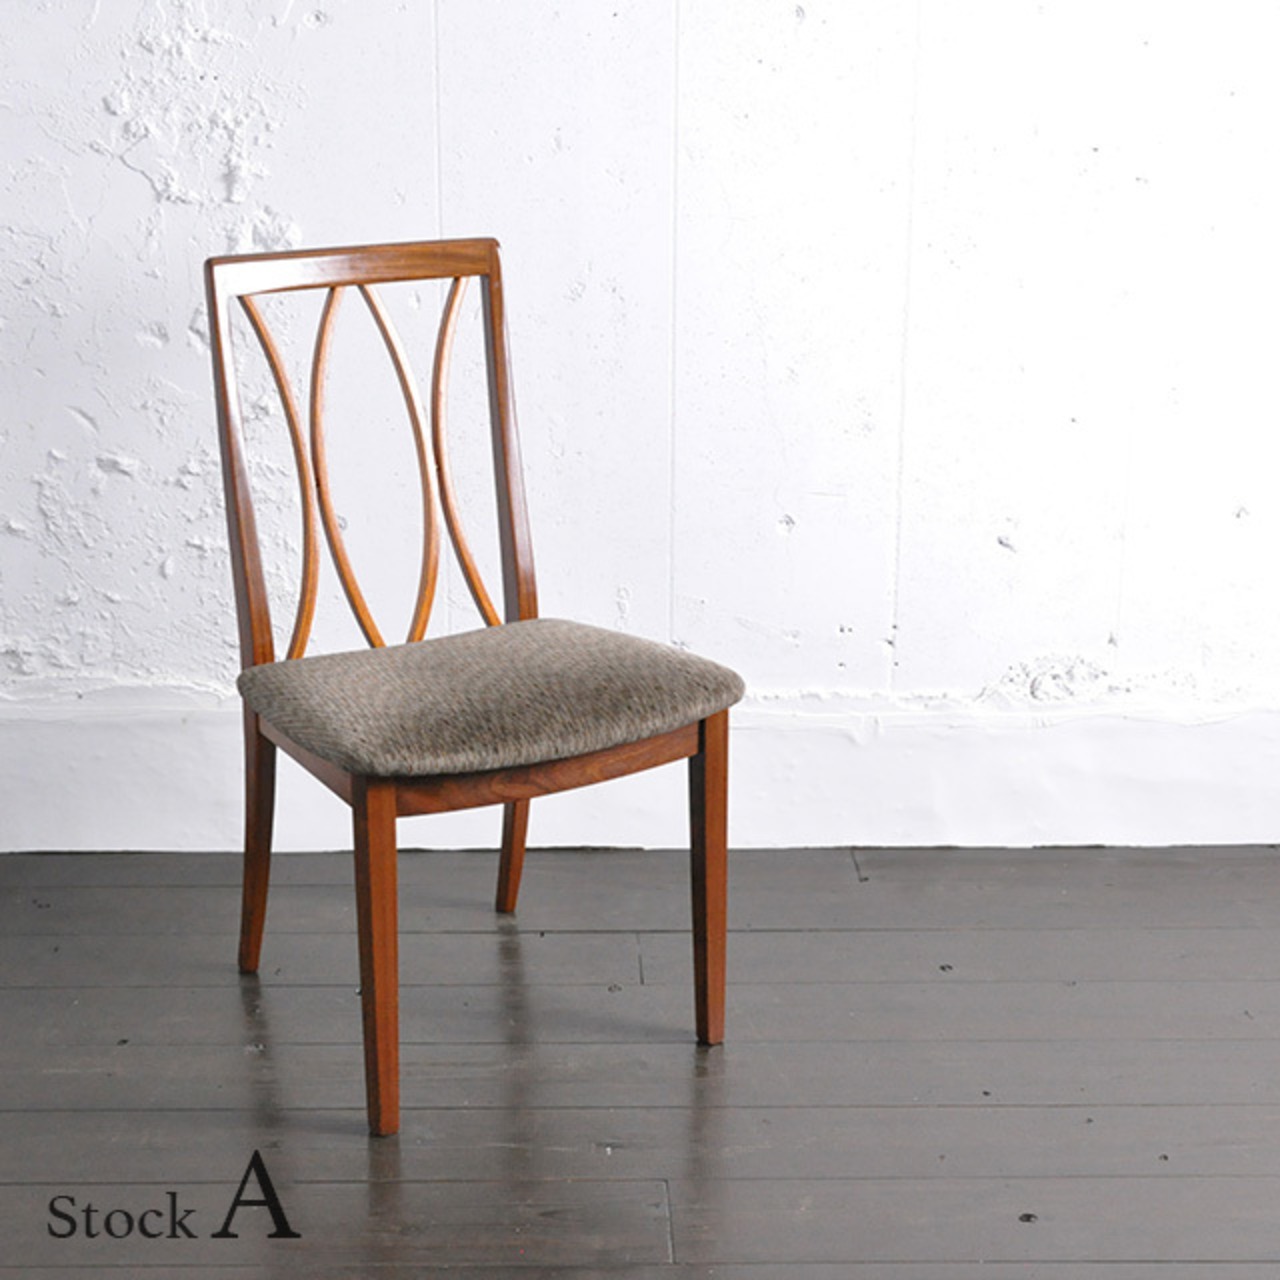 G-Plan X-back Dining Chair 【A】/ ジープラン エックスバック ダイニングチェア / 1806-0049a